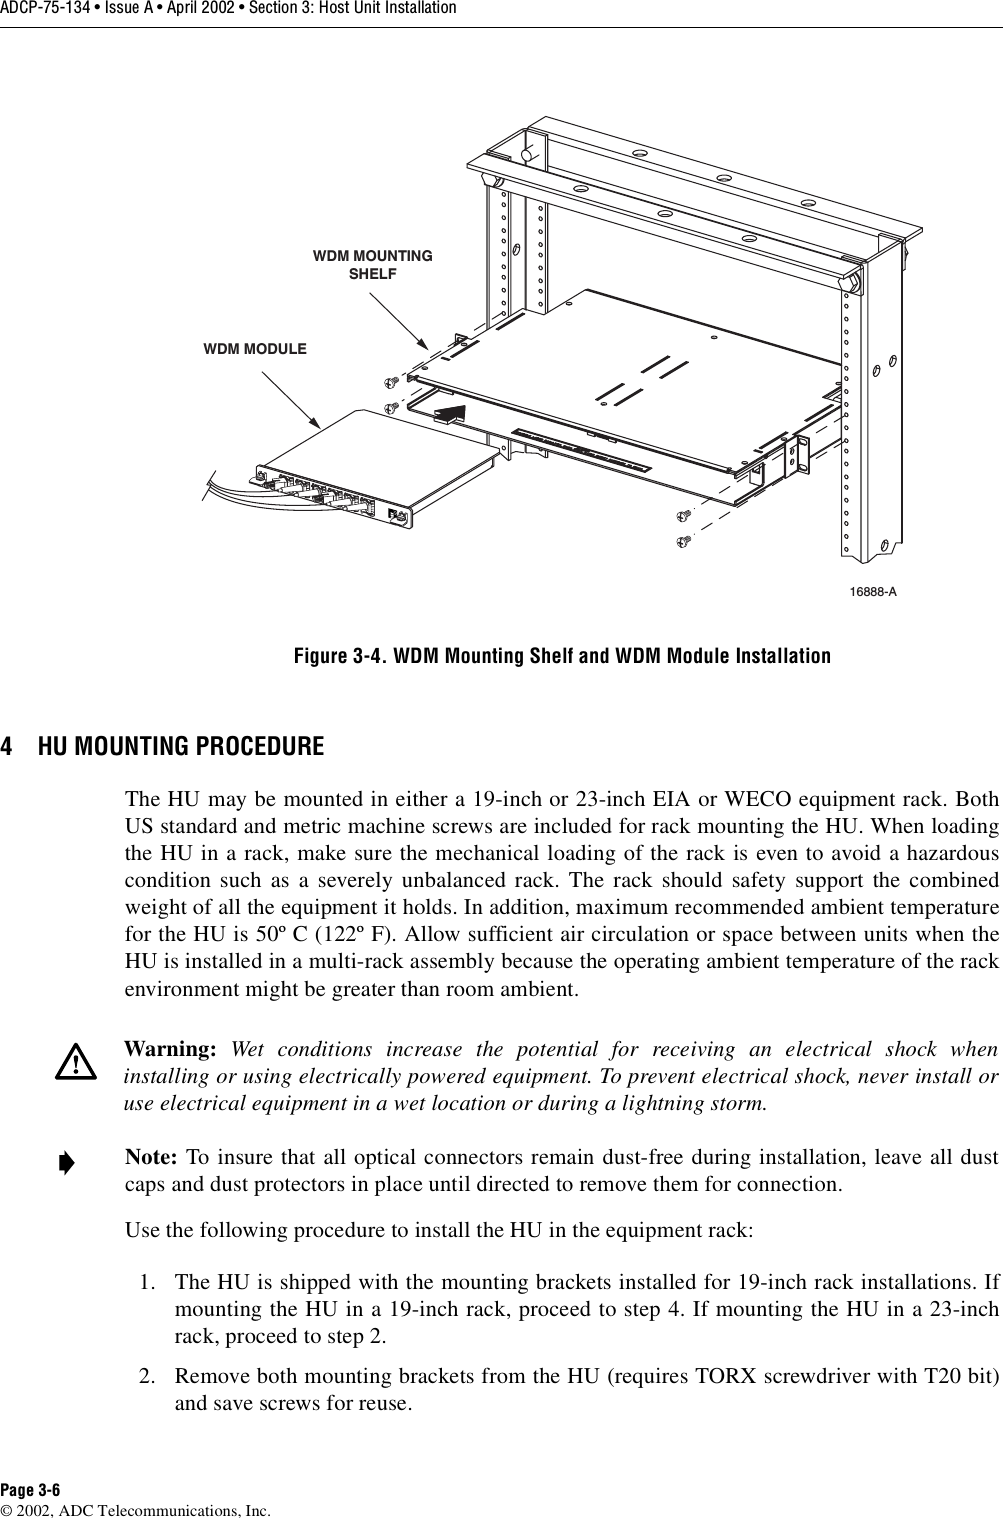 ADCP-75-134 • Issue A • April 2002 • Section 3: Host Unit InstallationPage 3-6©2002, ADC Telecommunications, Inc.Figure 3-4. WDM Mounting Shelf and WDM Module Installation4 HU MOUNTING PROCEDUREThe HU may be mounted in either a19-inch or 23-inch EIA or WECO equipment rack. BothUS standard and metric machine screws are included for rack mounting the HU. When loadingthe HU in arack, make sure the mechanical loading of the rack is even to avoid ahazardouscondition such as aseverely unbalanced rack. The rack should safety support the combinedweight of all the equipment it holds. In addition, maximum recommended ambient temperaturefor the HU is 50º C(122º F). Allow sufficient air circulation or space between units when theHU is installed in amulti-rack assembly because the operating ambient temperature of the rackenvironment might be greater than room ambient.Use the following procedure to install the HU in the equipment rack:1. The HU is shipped with the mounting brackets installed for 19-inch rack installations. Ifmounting the HU in a19-inch rack, proceed to step 4. If mounting the HU in a23-inchrack, proceed to step 2.2. Remove both mounting brackets from the HU (requires TORX screwdriver with T20 bit)and save screws for reuse.Warning: Wet conditions increase the potential for receiving an electrical shock wheninstalling or using electrically powered equipment. To prevent electrical shock, never install oruse electrical equipment in awet location or during alightning storm.Note: To insure that all optical connectors remain dust-free during installation, leave all dustcaps and dust protectors in place until directed to remove them for connection.16888-A WDM MODULEWDM MOUNTINGSHELF